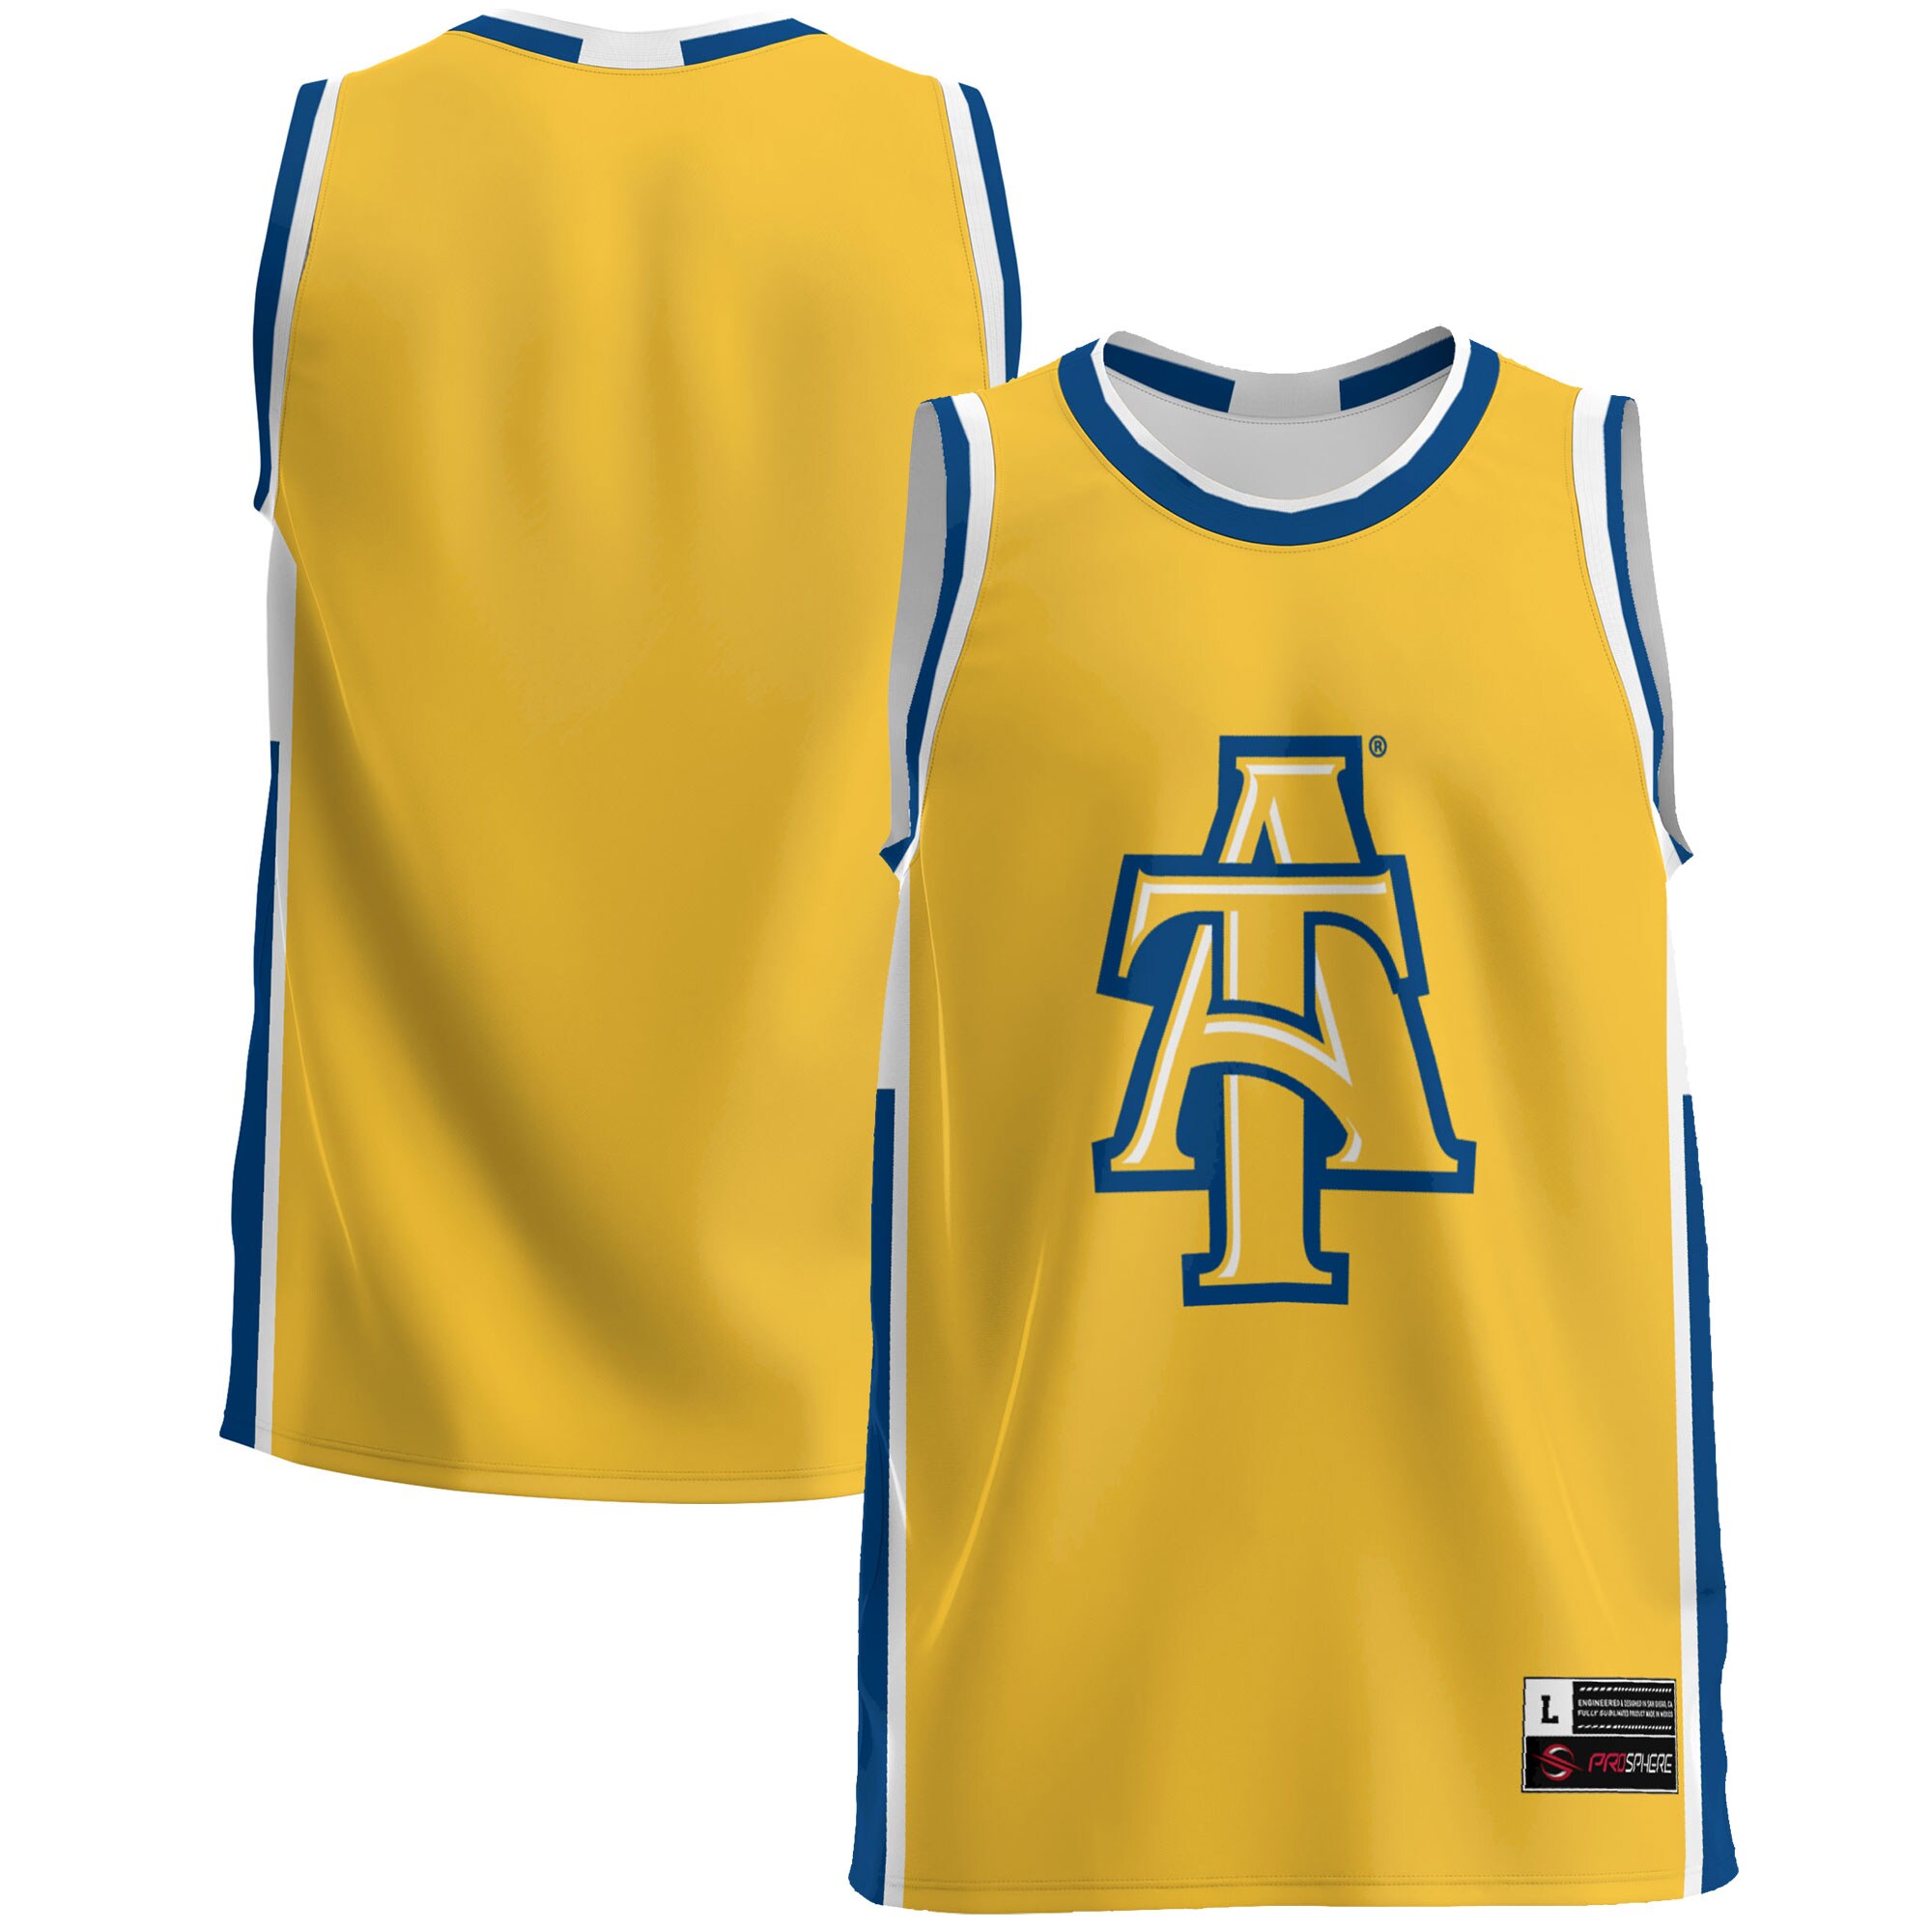 North Carolina A&T Aggies Basketball Jersey - Gold For Youth Women Men